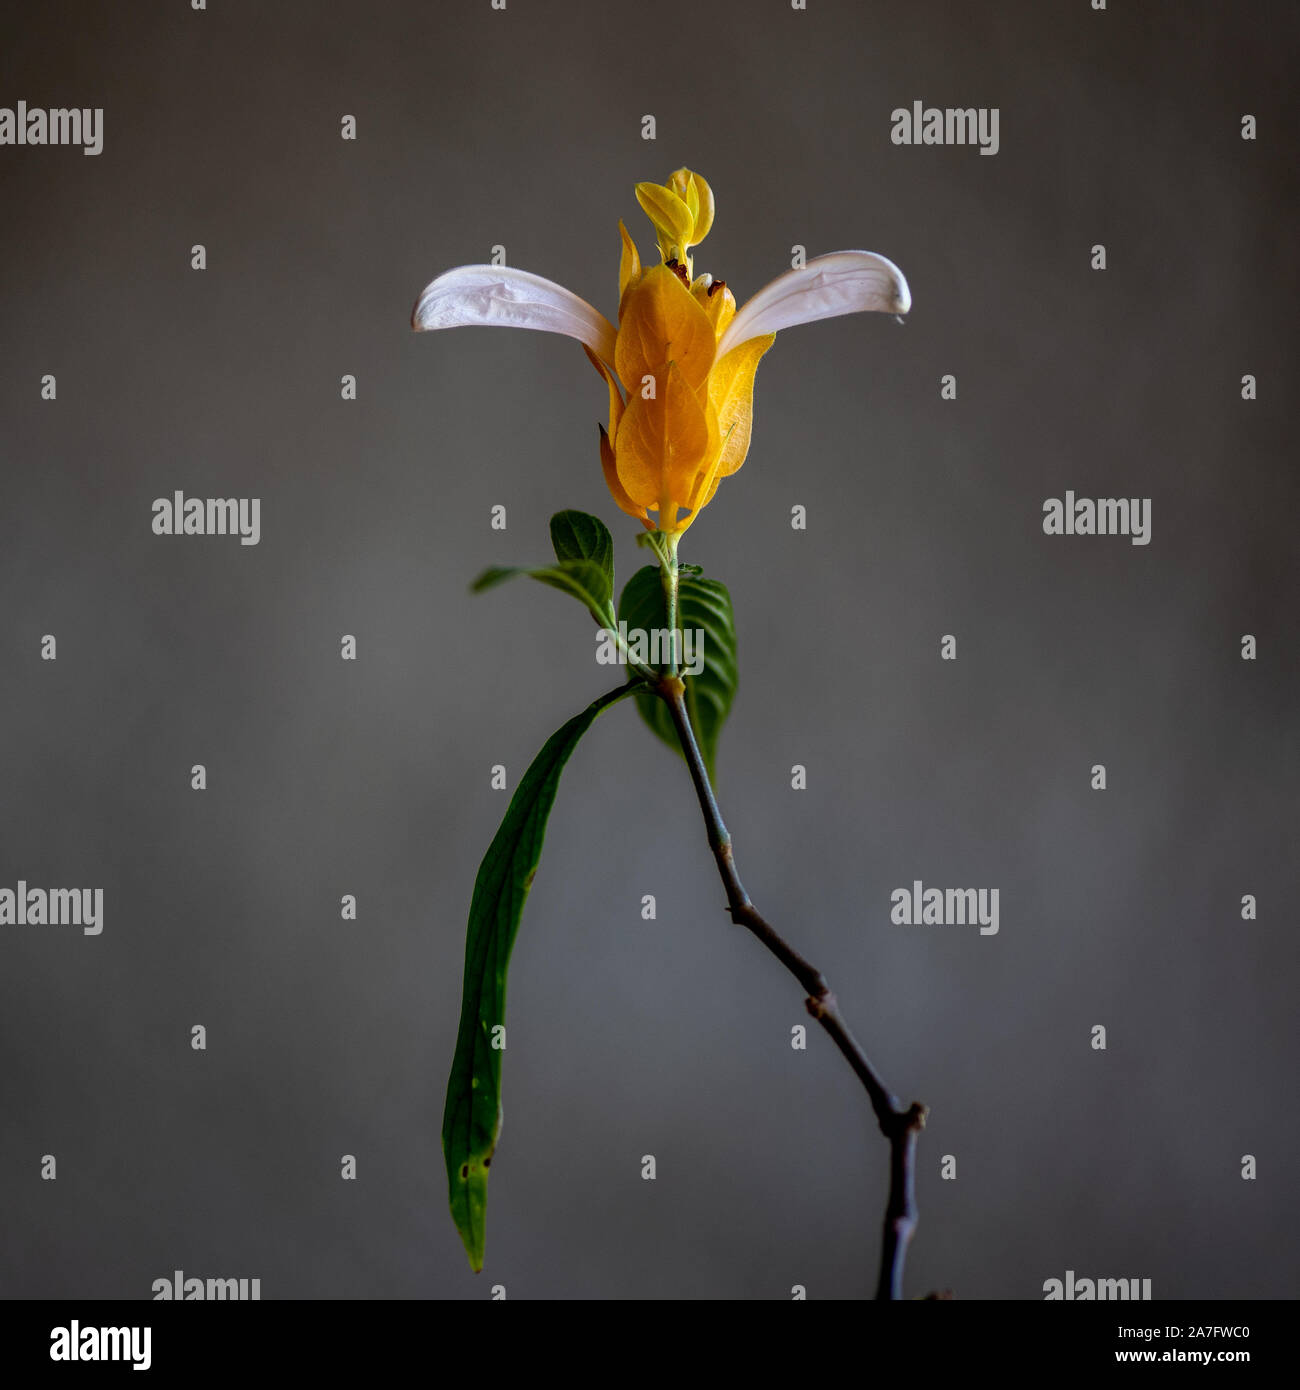 Shrimp flower from Mexico (Justicia brandegeeana;) on grey background, one flower side view, still life Stock Photo